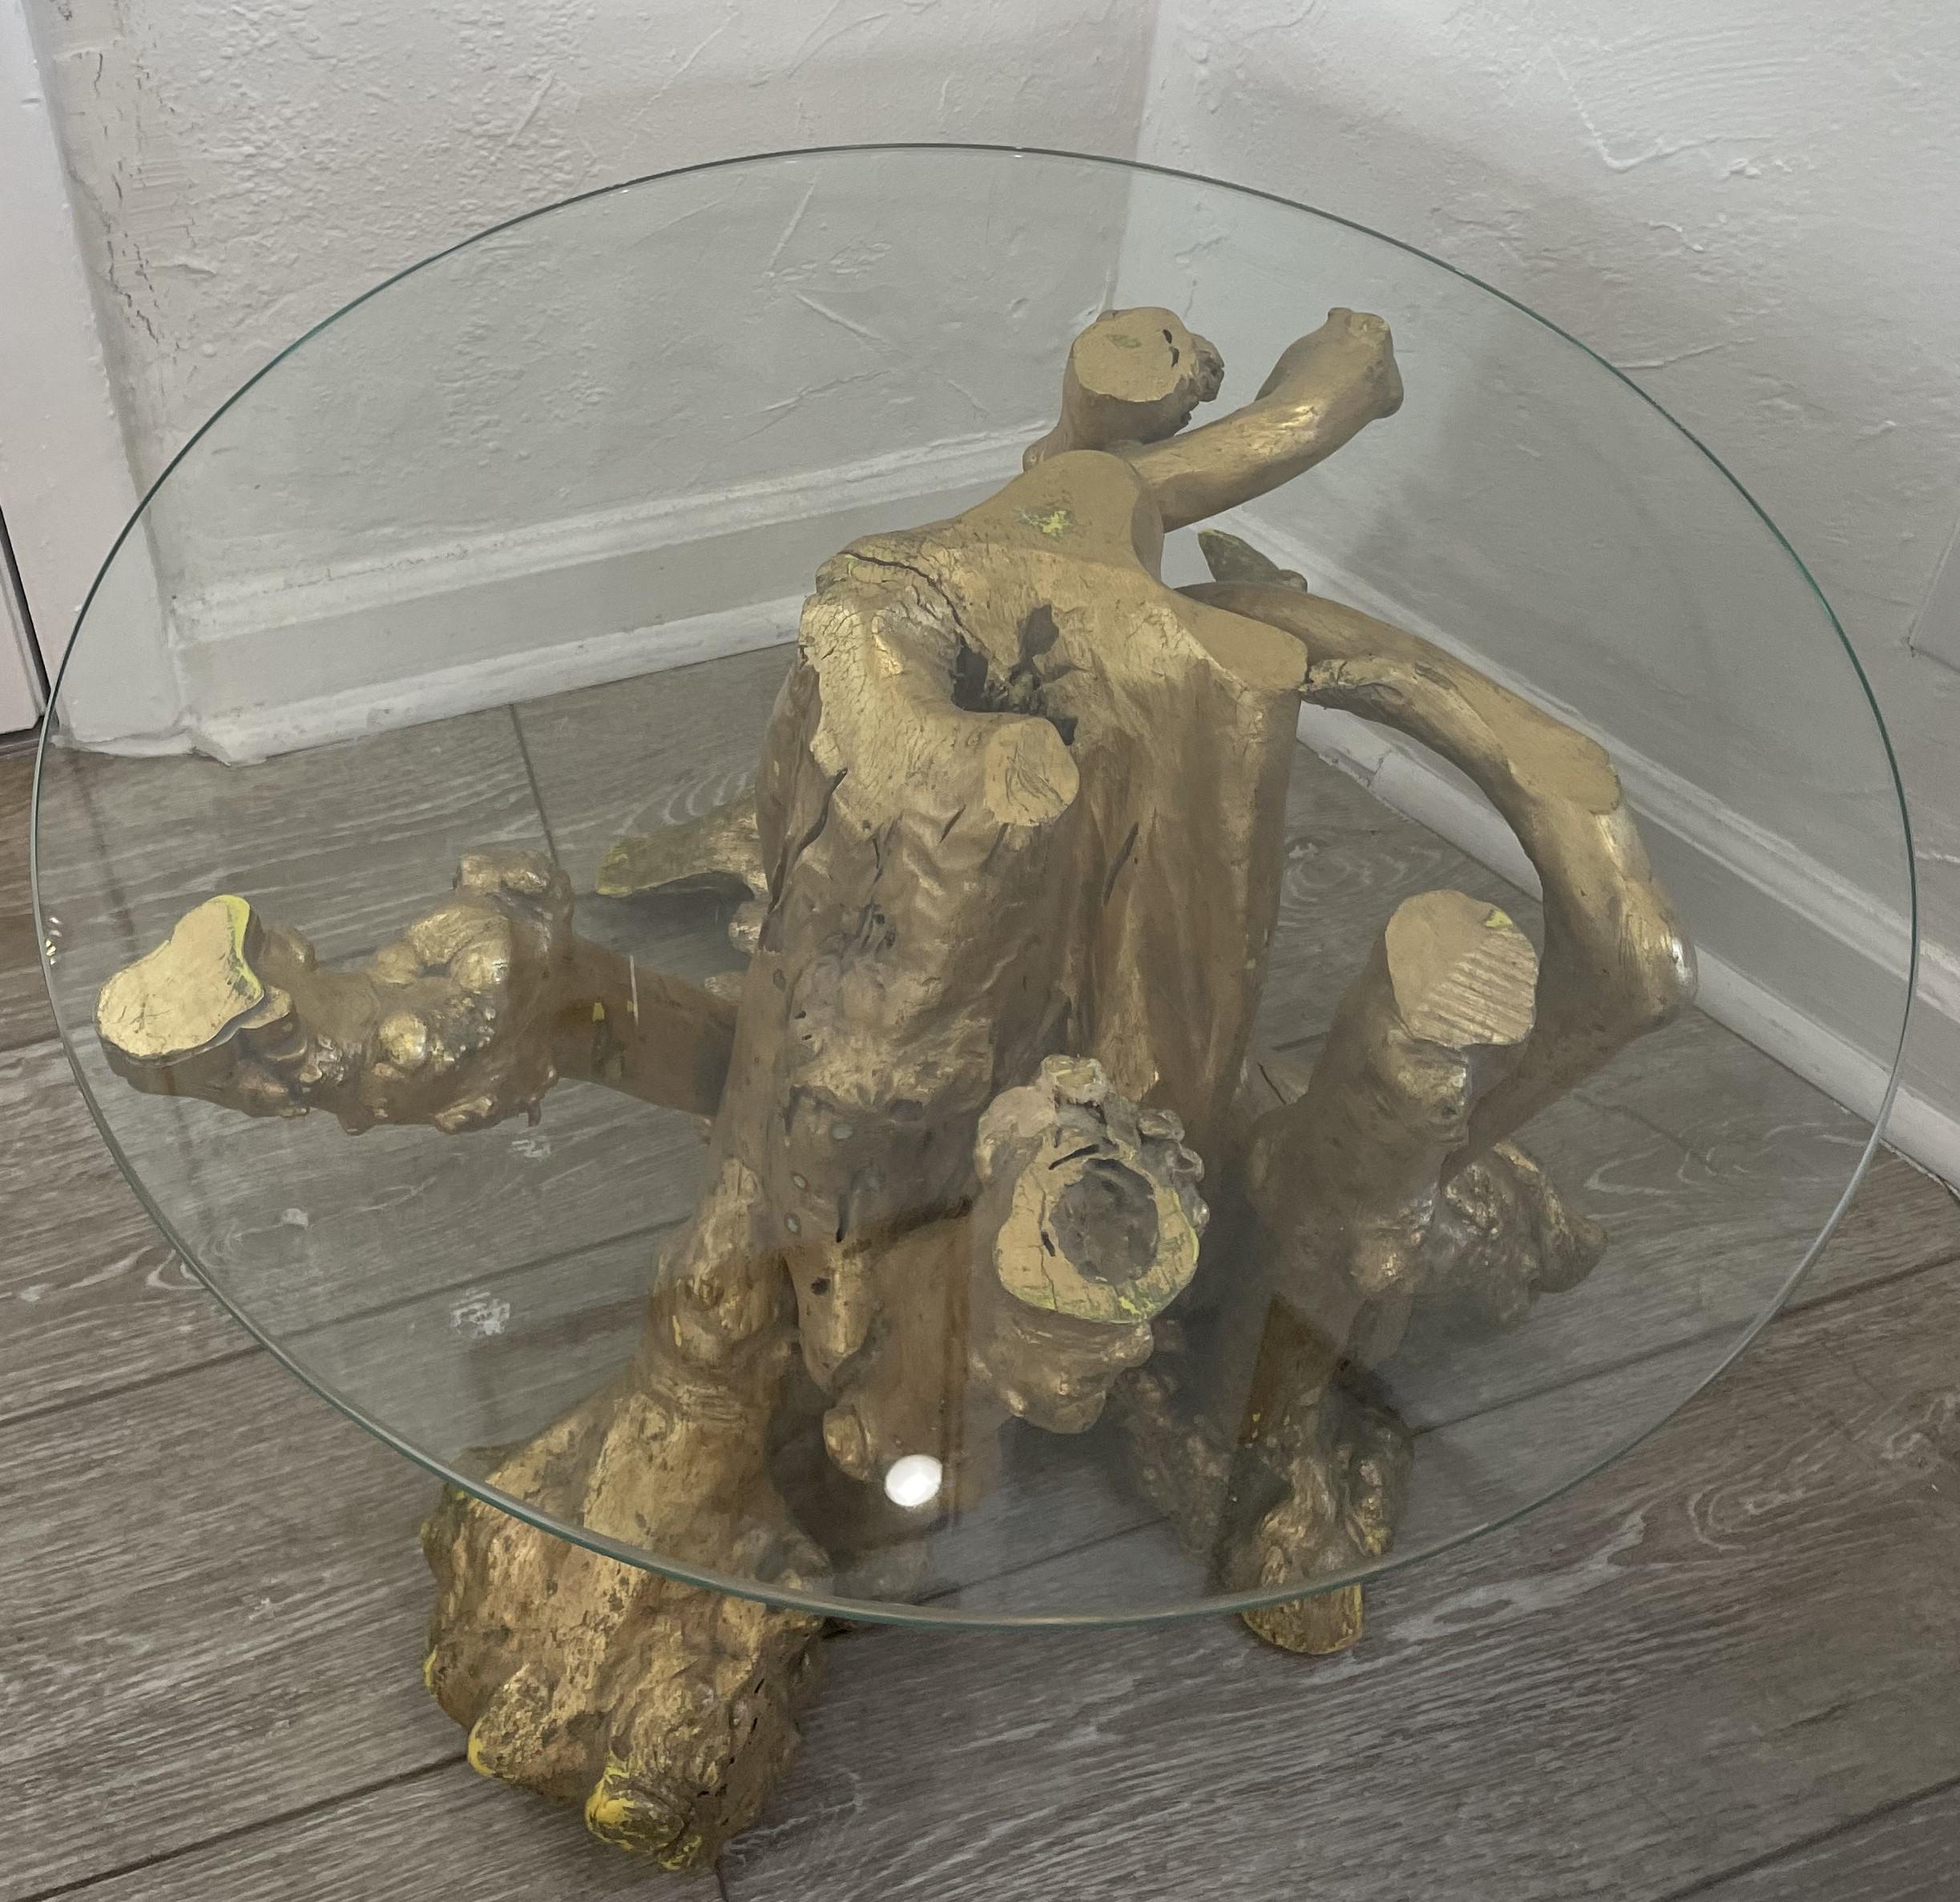 This table’s natural root base, which is finished in gold, stands out both for its organic beauty and its vibrancy. The clear glass top allows visibility from every angle.